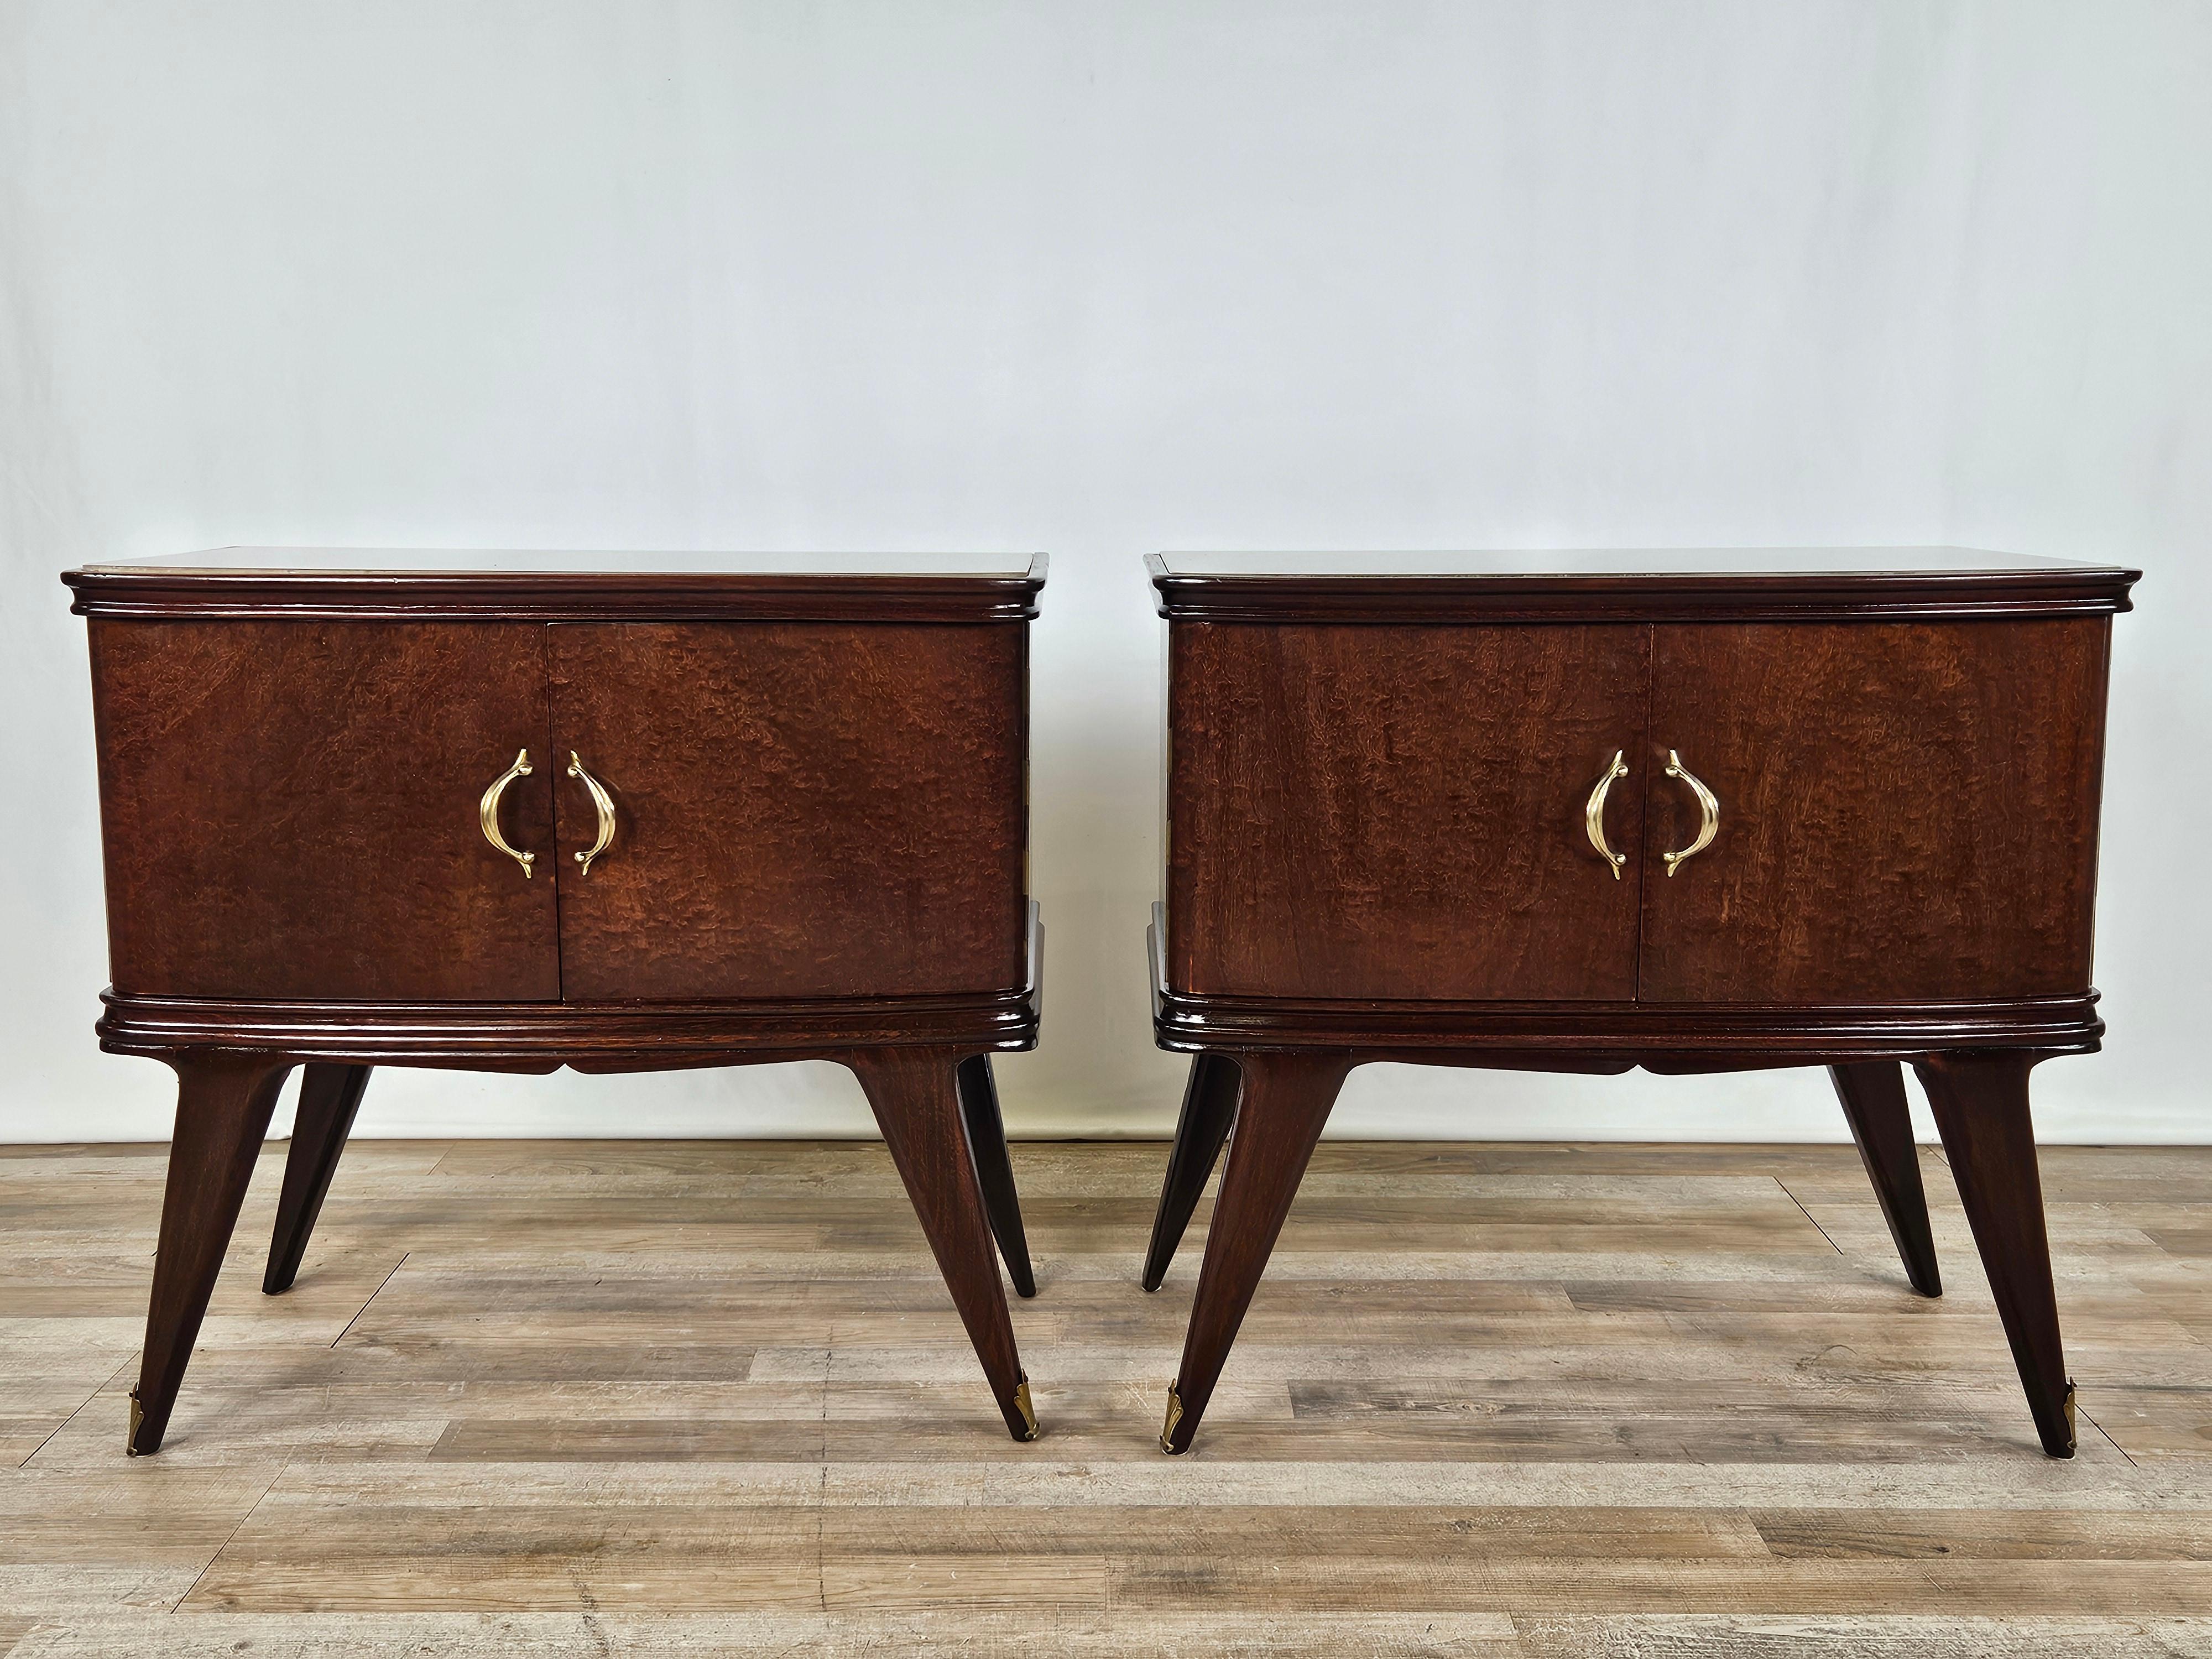 Fine and elegant pair of 1950s Mid Century mahogany feather bedside tables with double doors and interior space.

The top is decorated with original stained glass from the period, which gives contrast and a designer touch to the cabinet.

Modern and